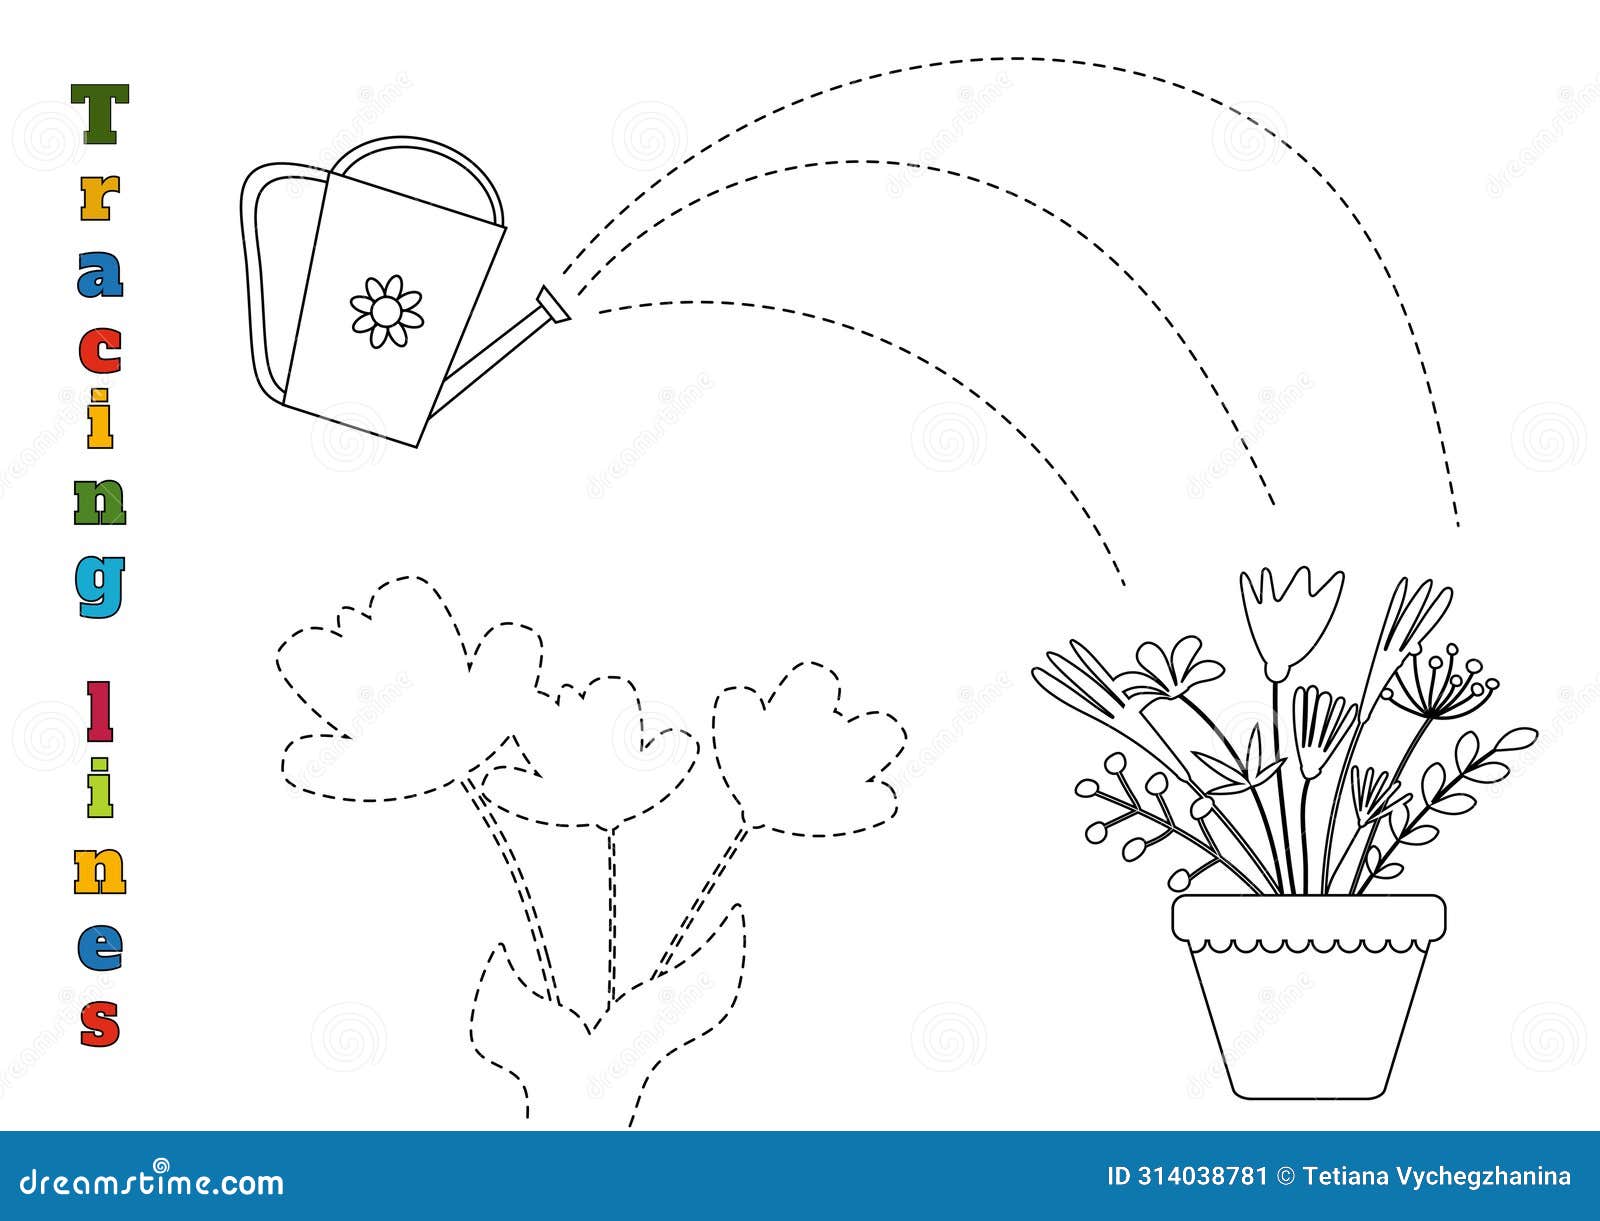 draw a line from watering can to flower